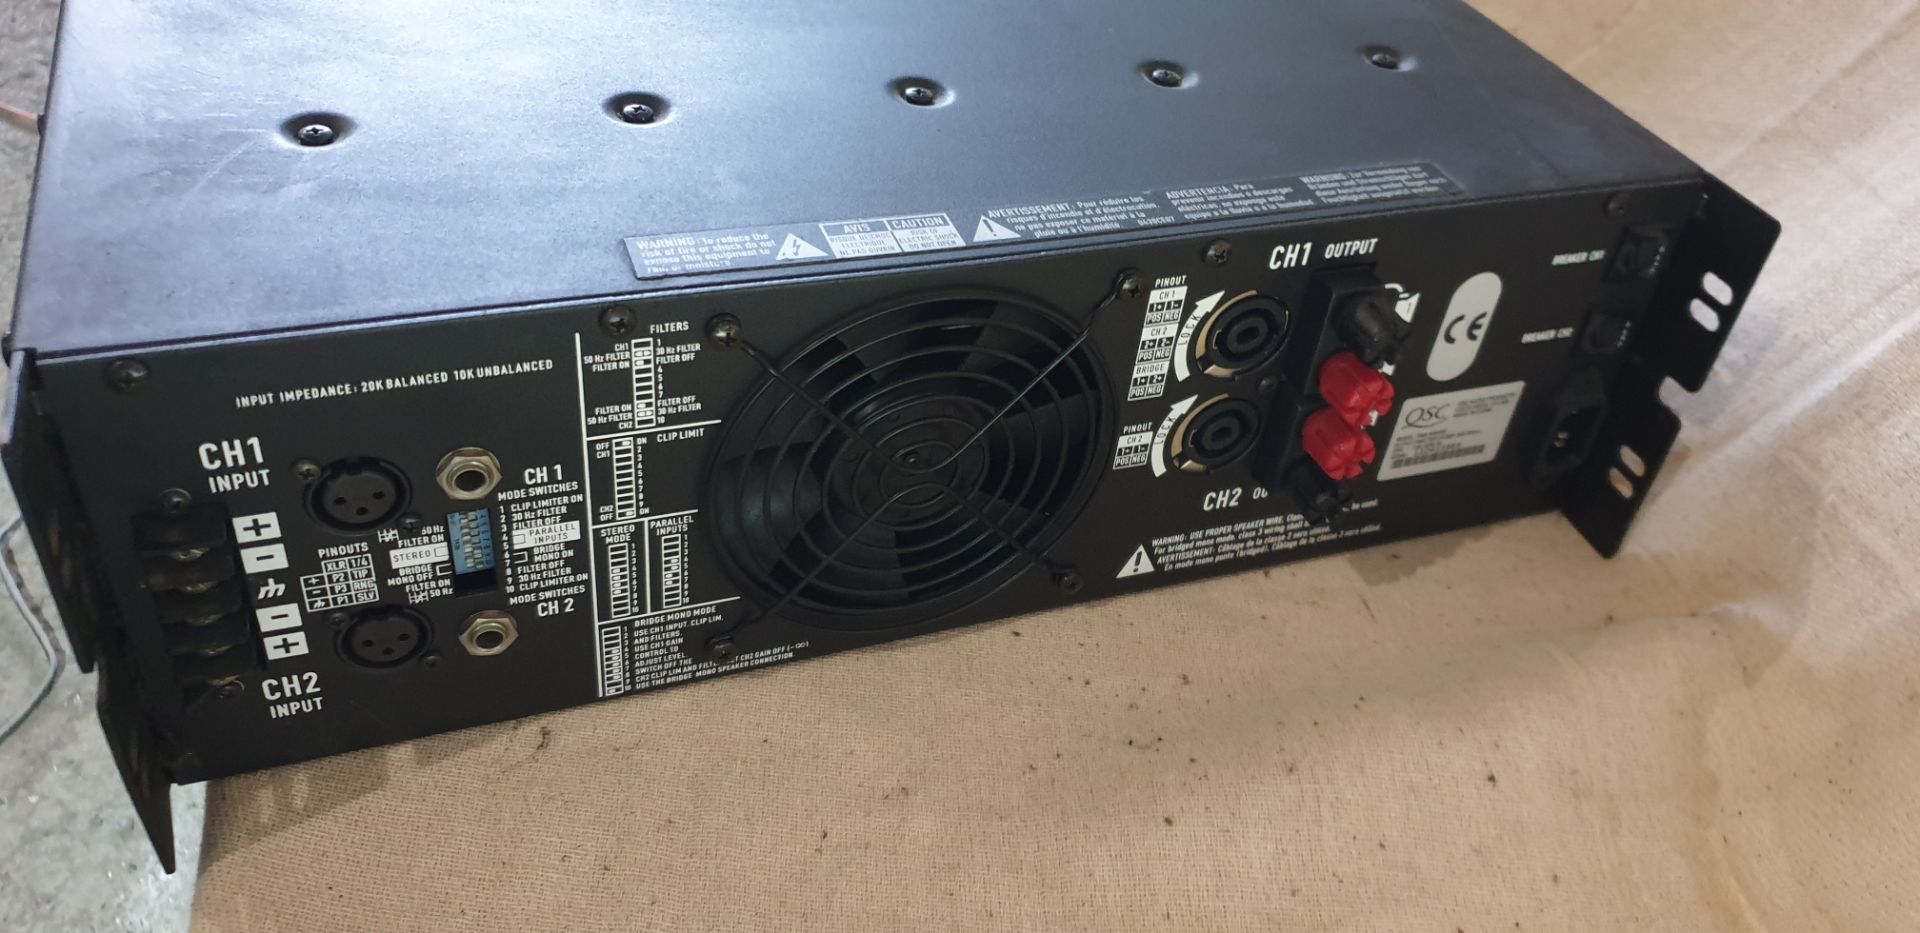 1 ; QSC Audio RMX 4050 HD Professional Power Amplifier - Image 2 of 2